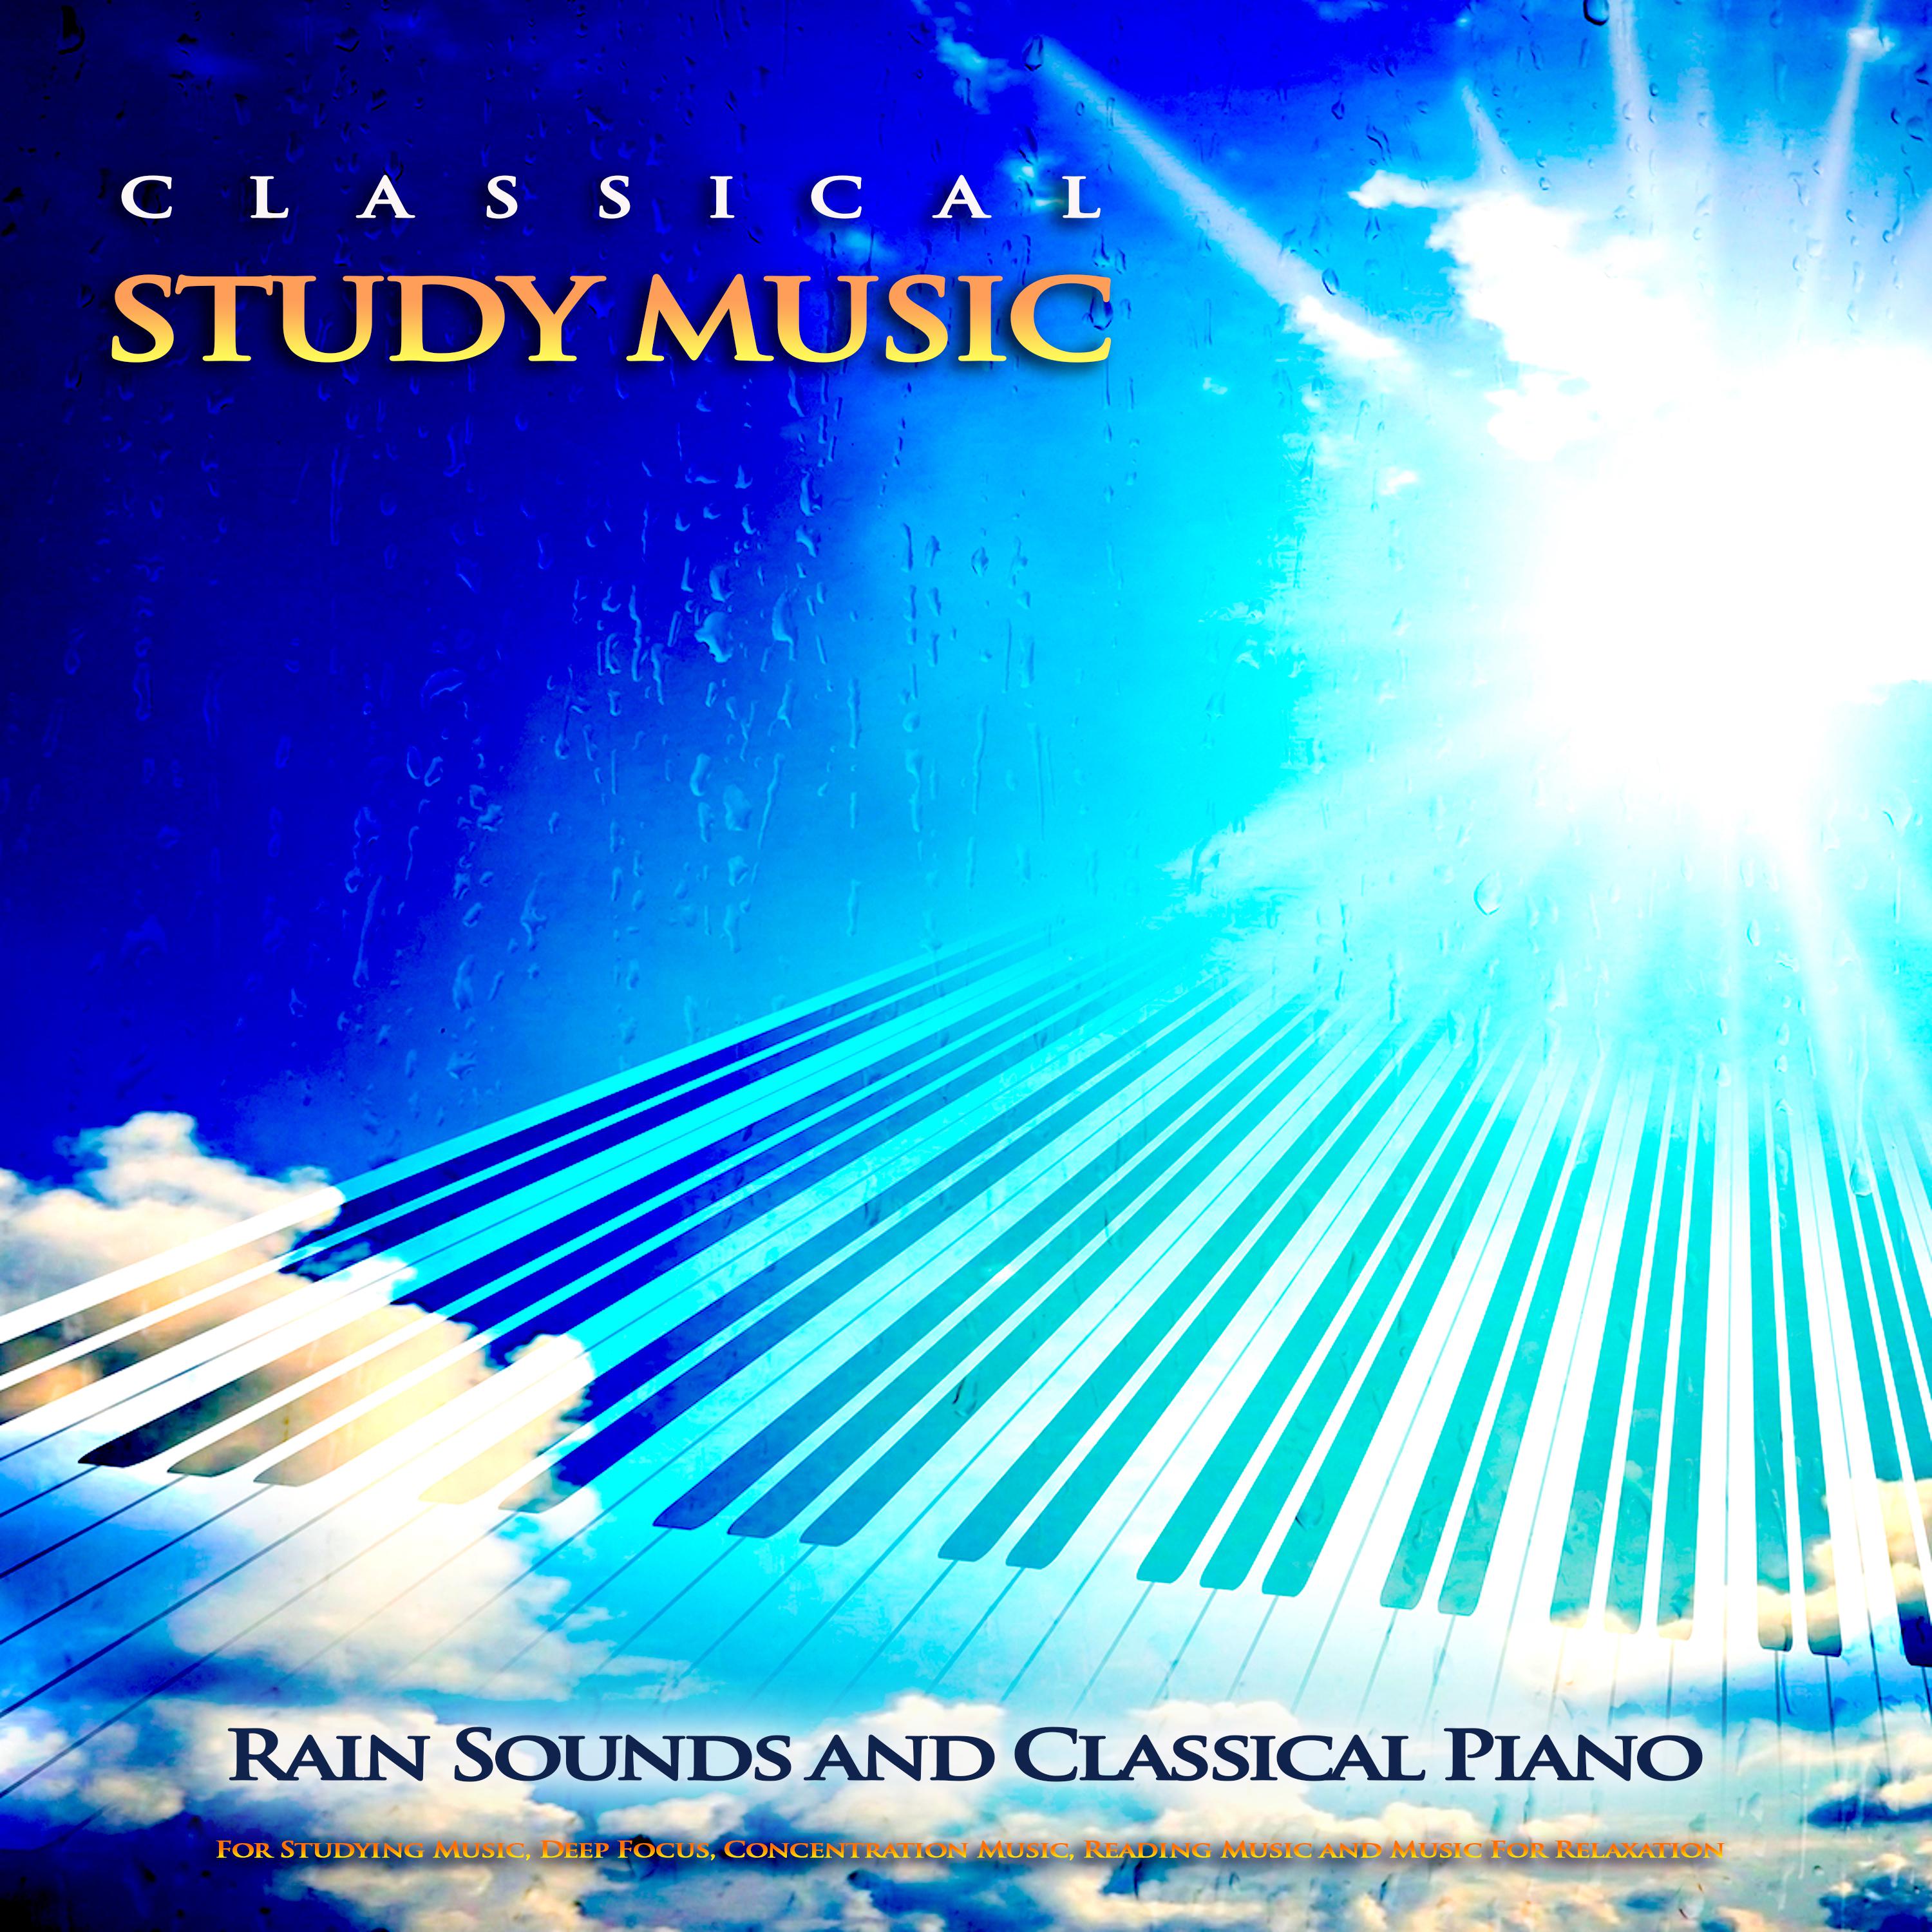 Prelude in Db - Chopin - Classical Piano Music and Rain Sounds - Classical Study Music